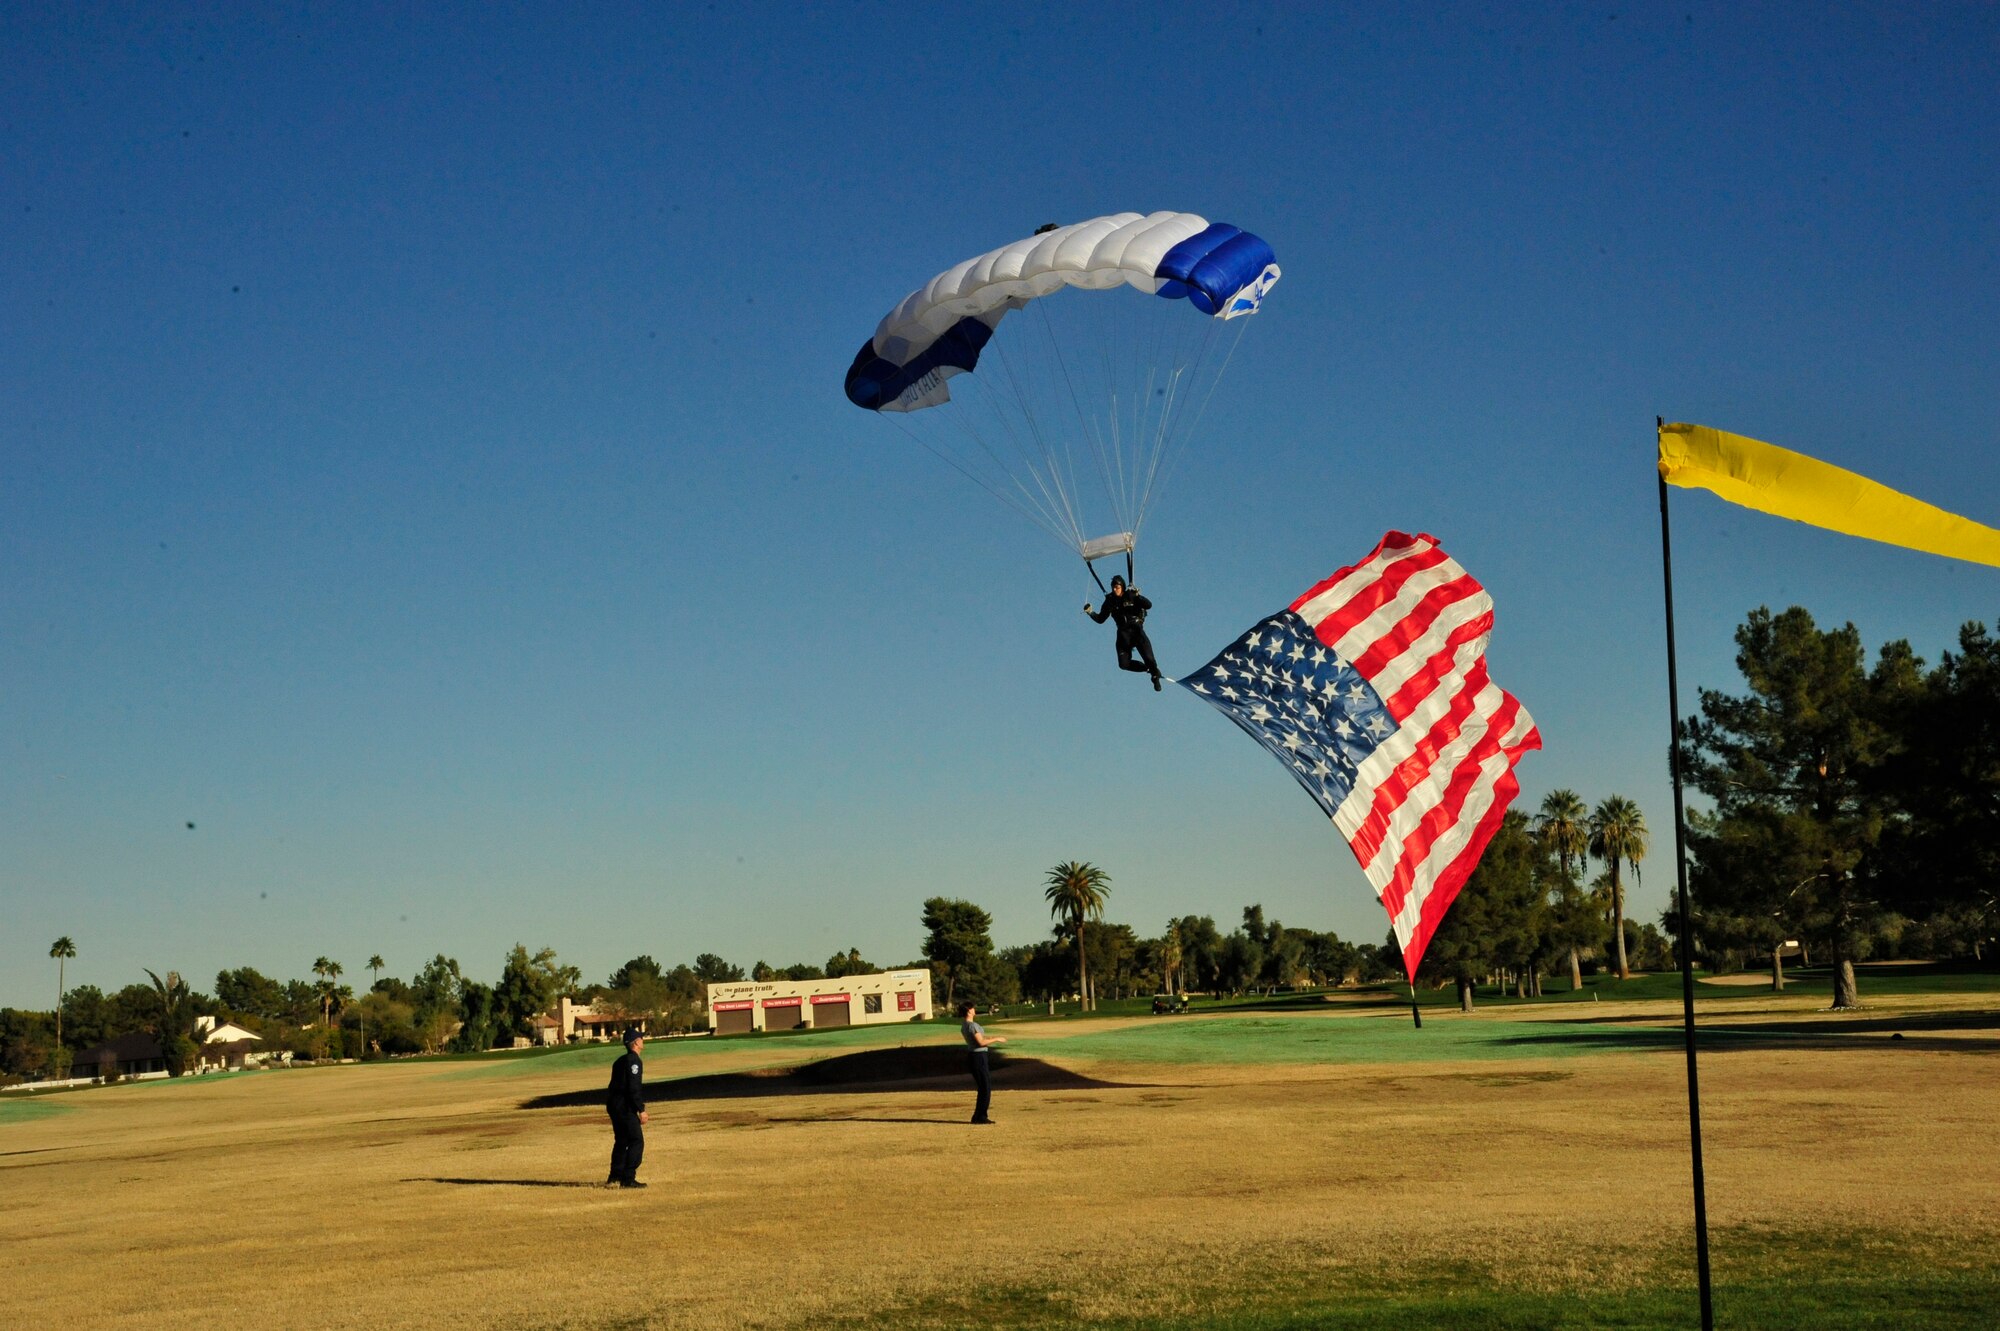 An Air Force Wings of Blue member makes an approach to land Friday at the Litchfield Golf Course in Litchfield Park, Ariz. Wings of Blue members do roughly 19,000 jumps per year for the Air Force basic freefalling course AM490 and training. (U.S. Air Force photo/Senior Airman Grace Lee)